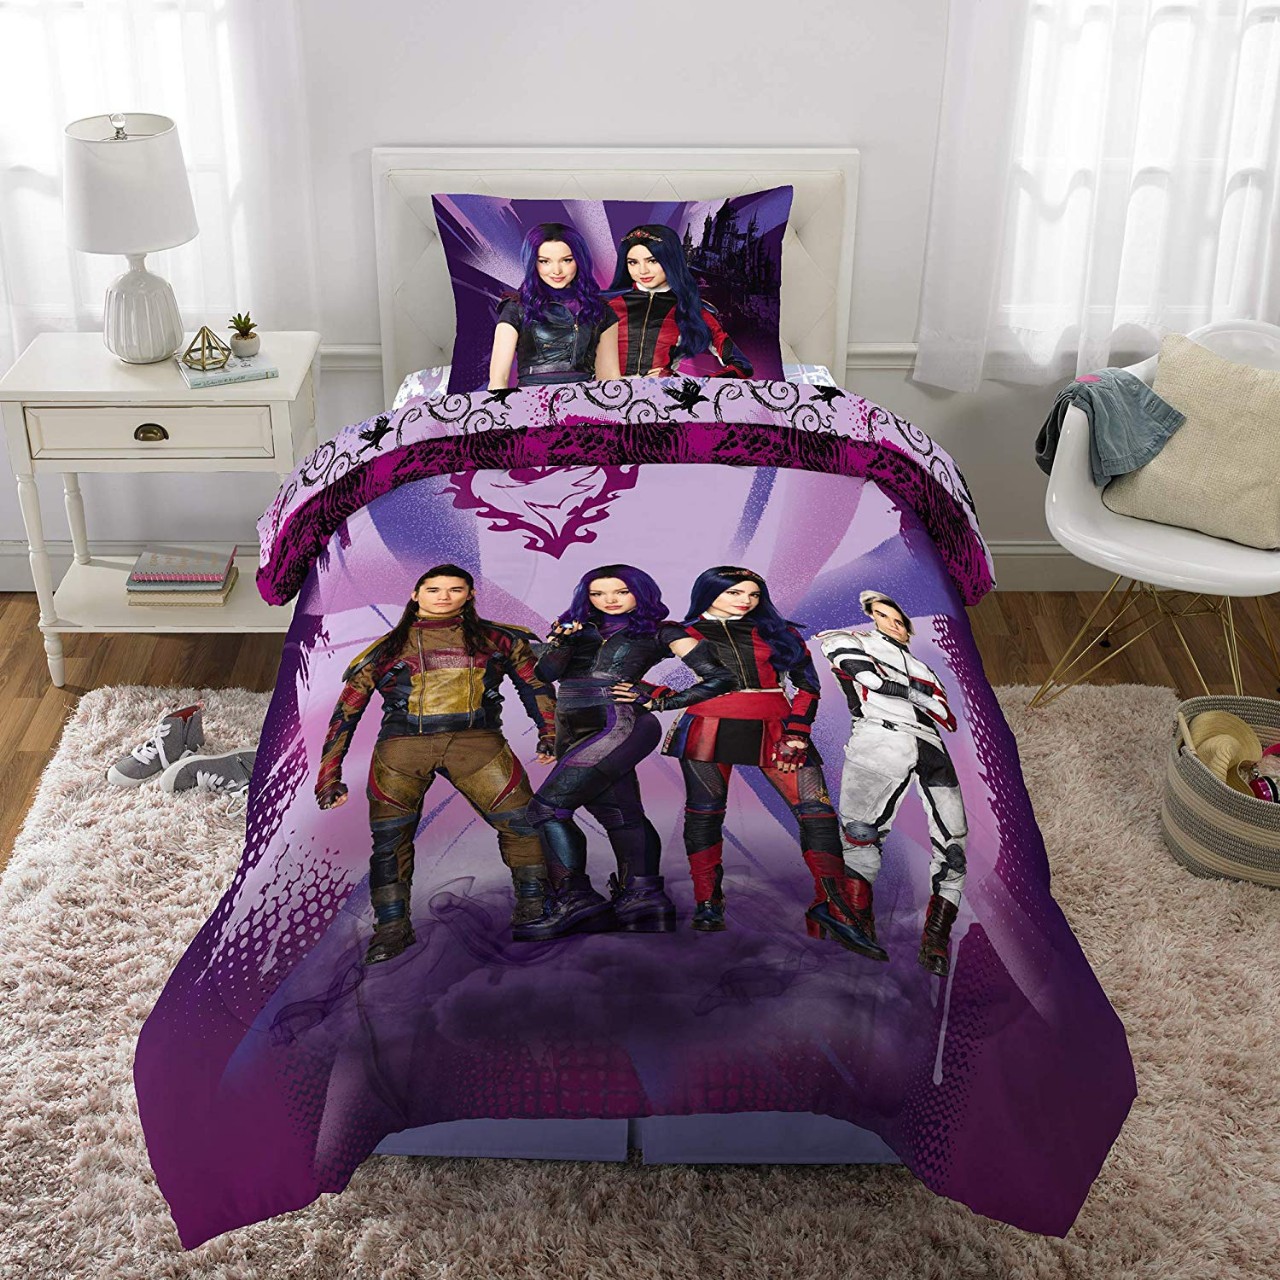 Jay Franco Disney's Descendants 3 Twin Size 5pc Bedding Collection with Comforter, Sheet Set and Sha